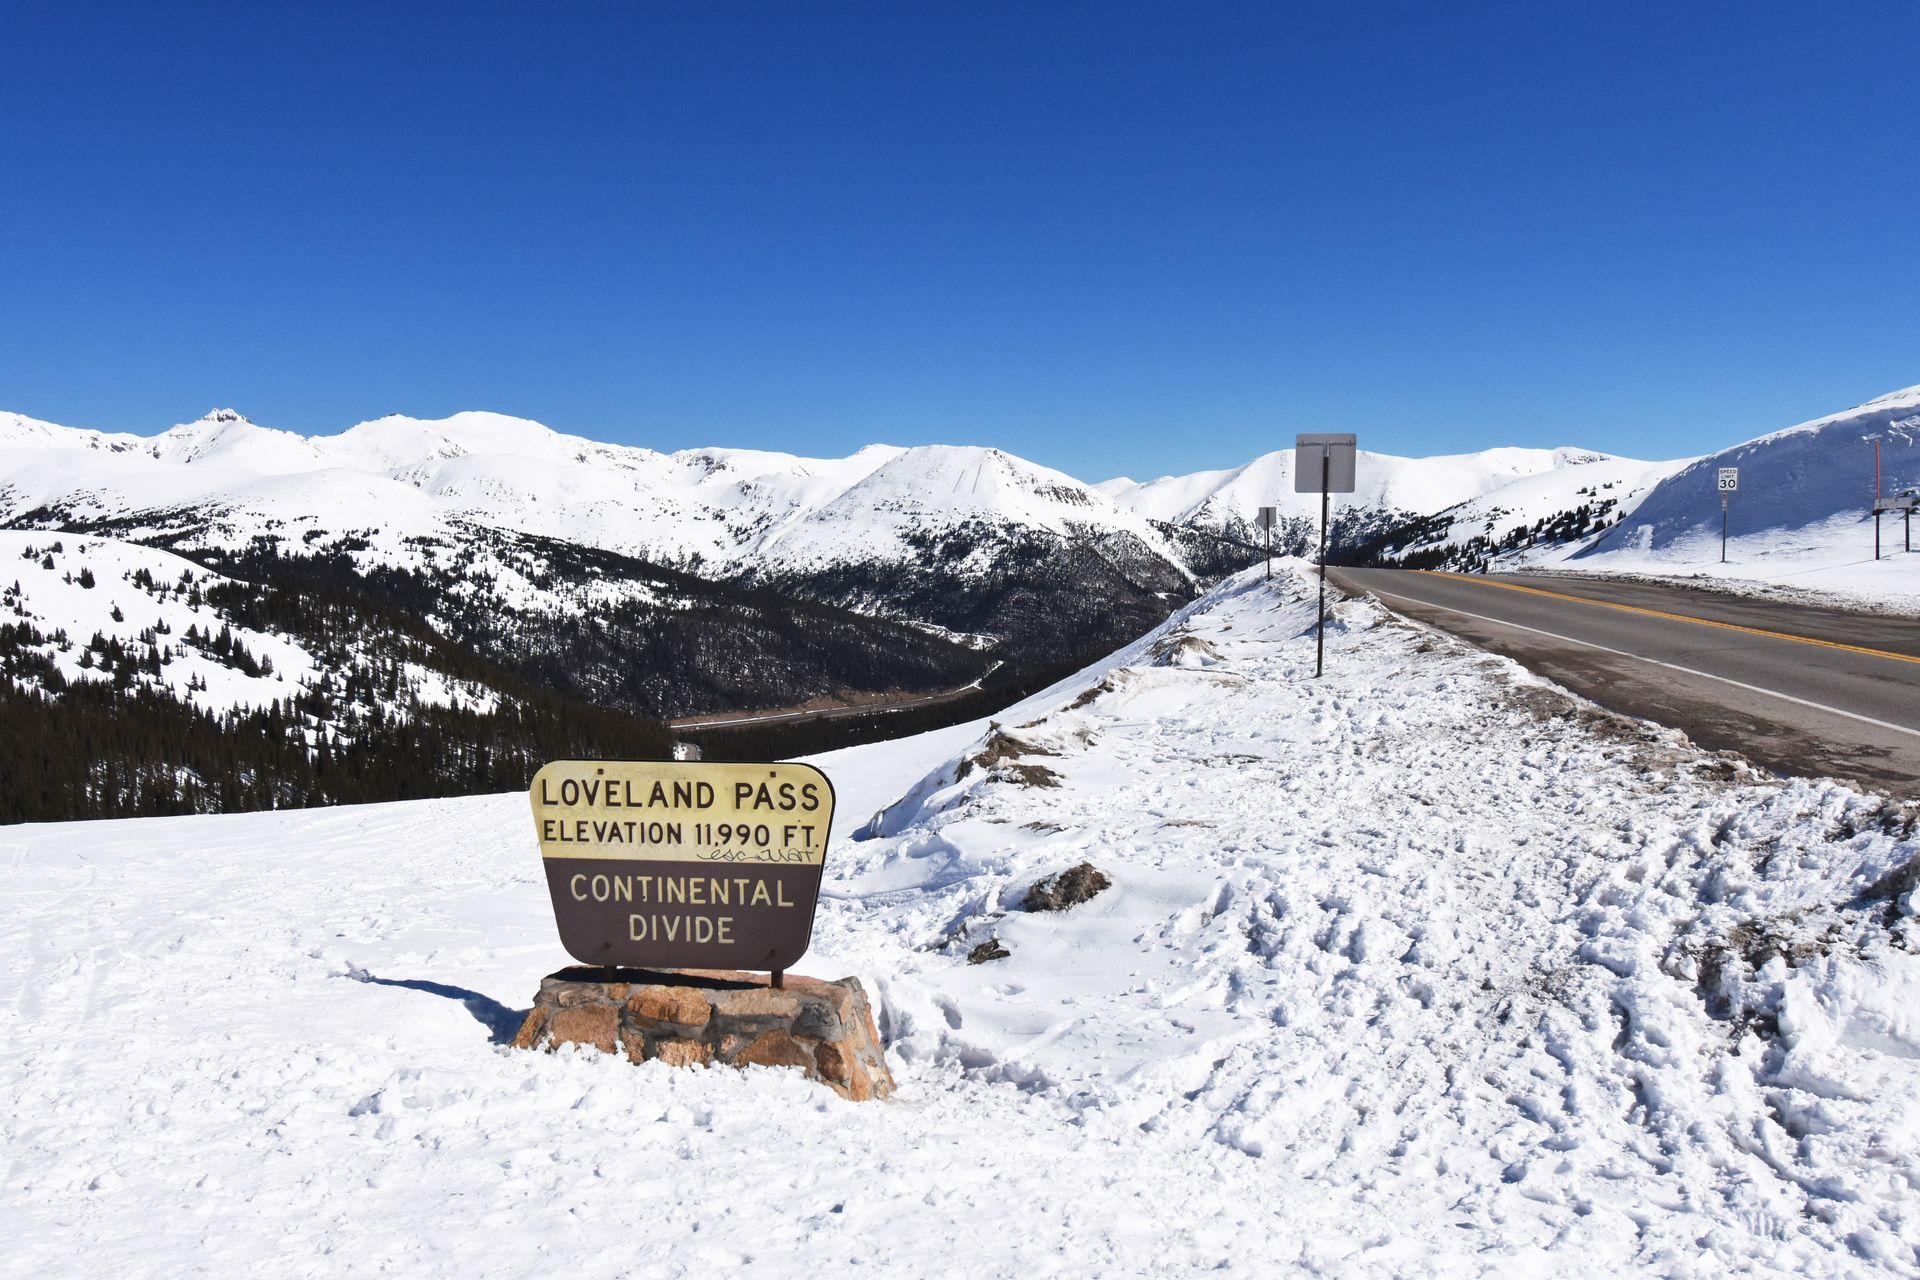 A view of the Loveland Pass sign with snow covered mountains and the road in the background.